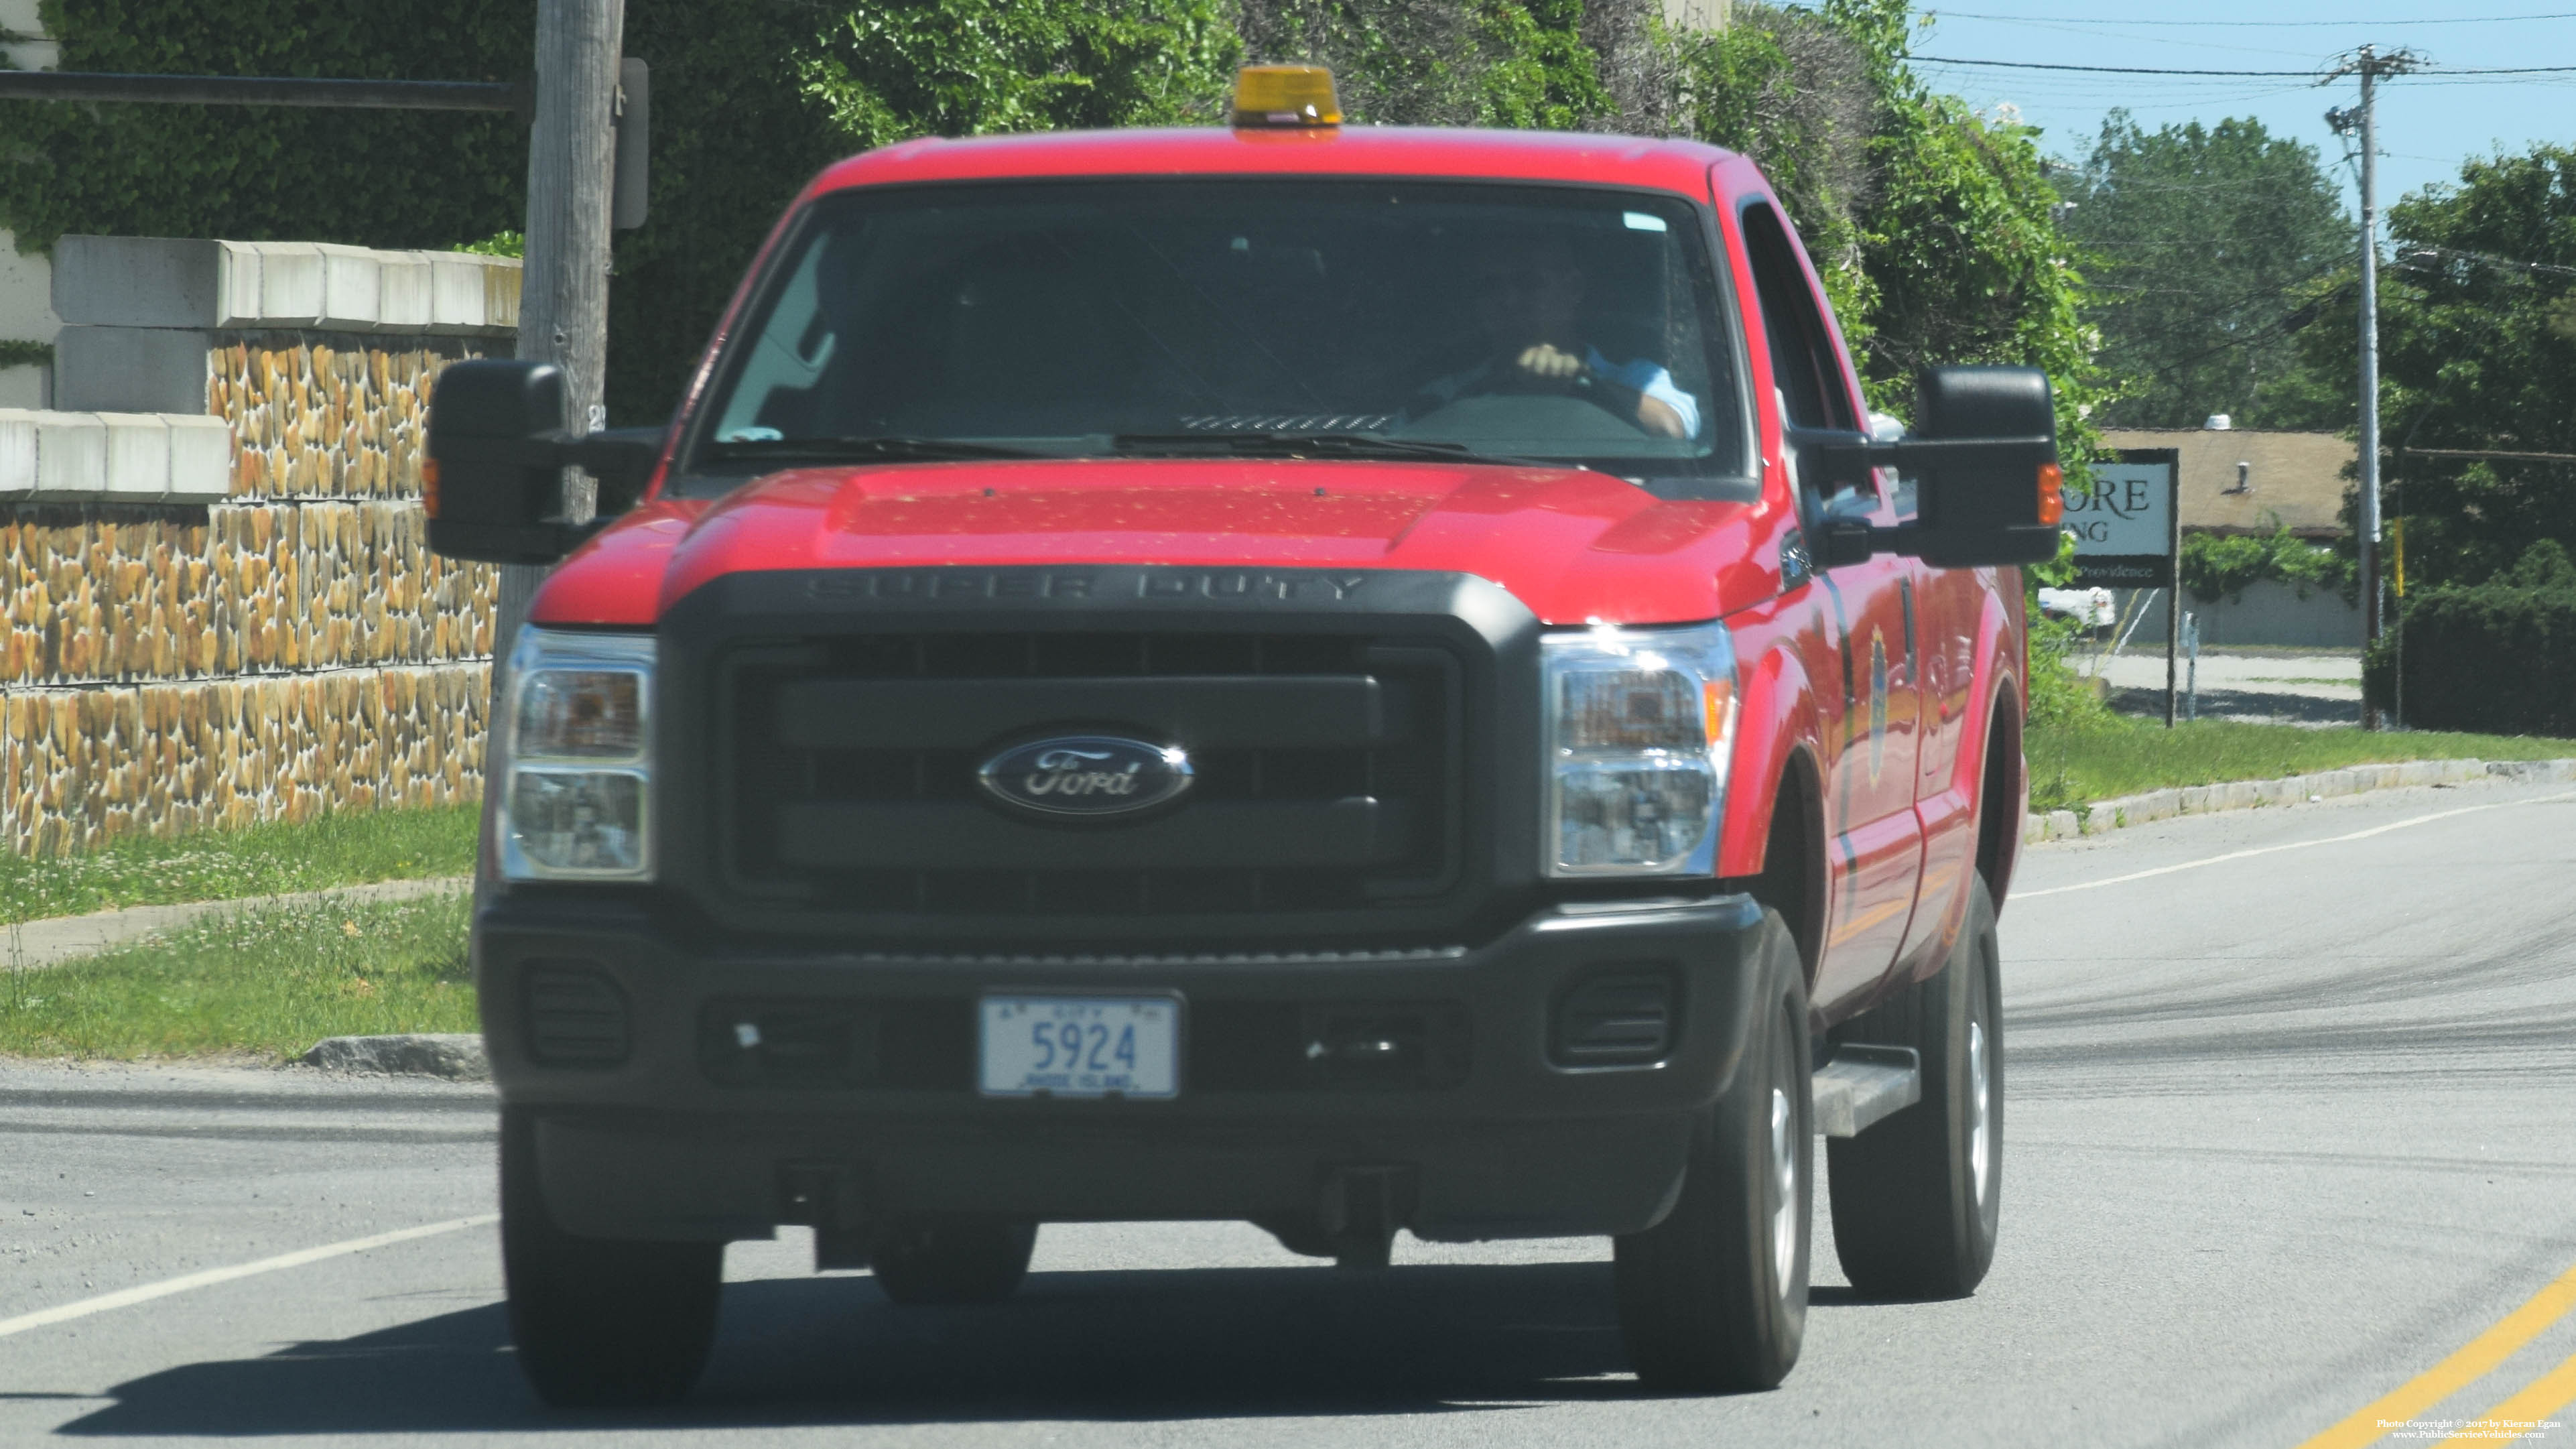 A photo  of East Providence Highway Division
            Truck 5924, a 2011-2016 Ford F-250             taken by Kieran Egan